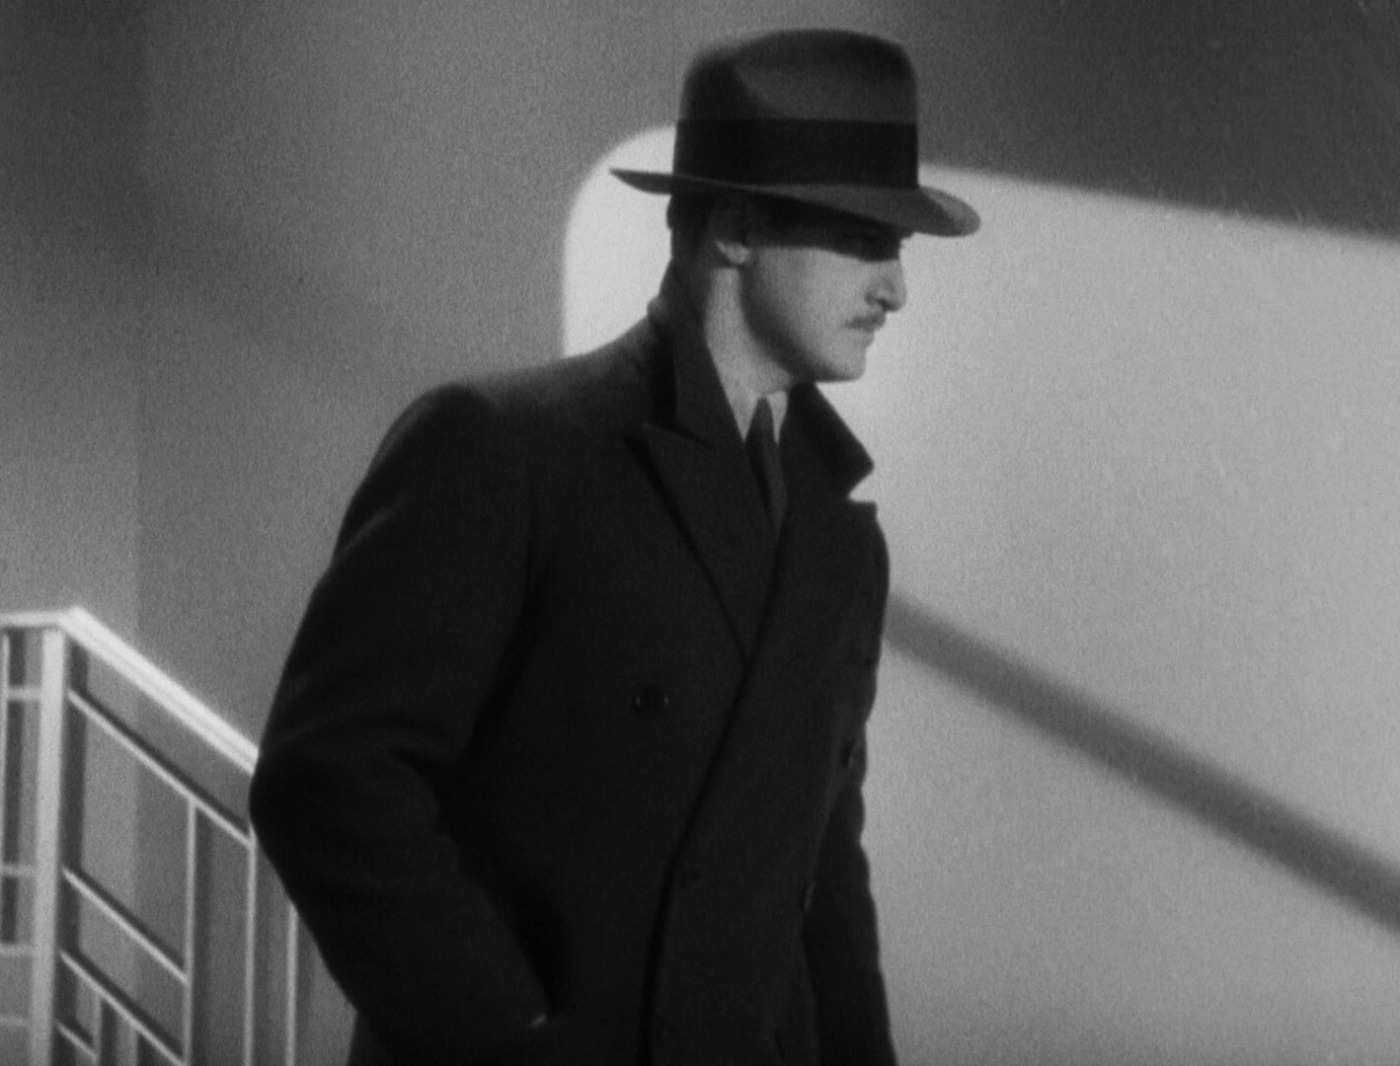 THE 39 STEPS (1935)